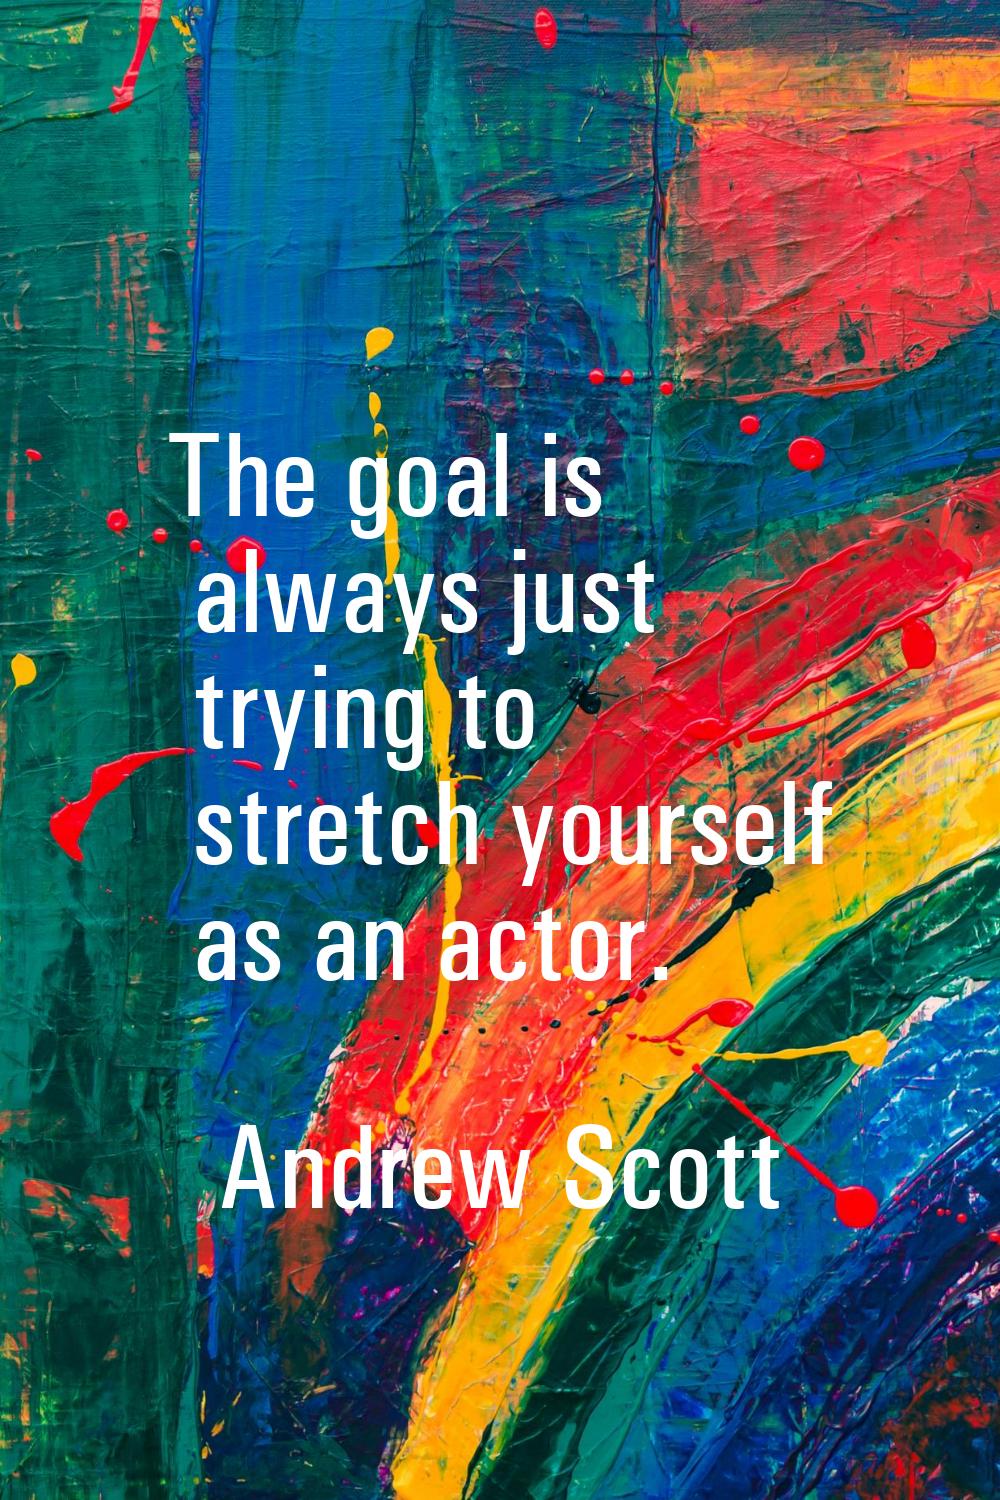 The goal is always just trying to stretch yourself as an actor.